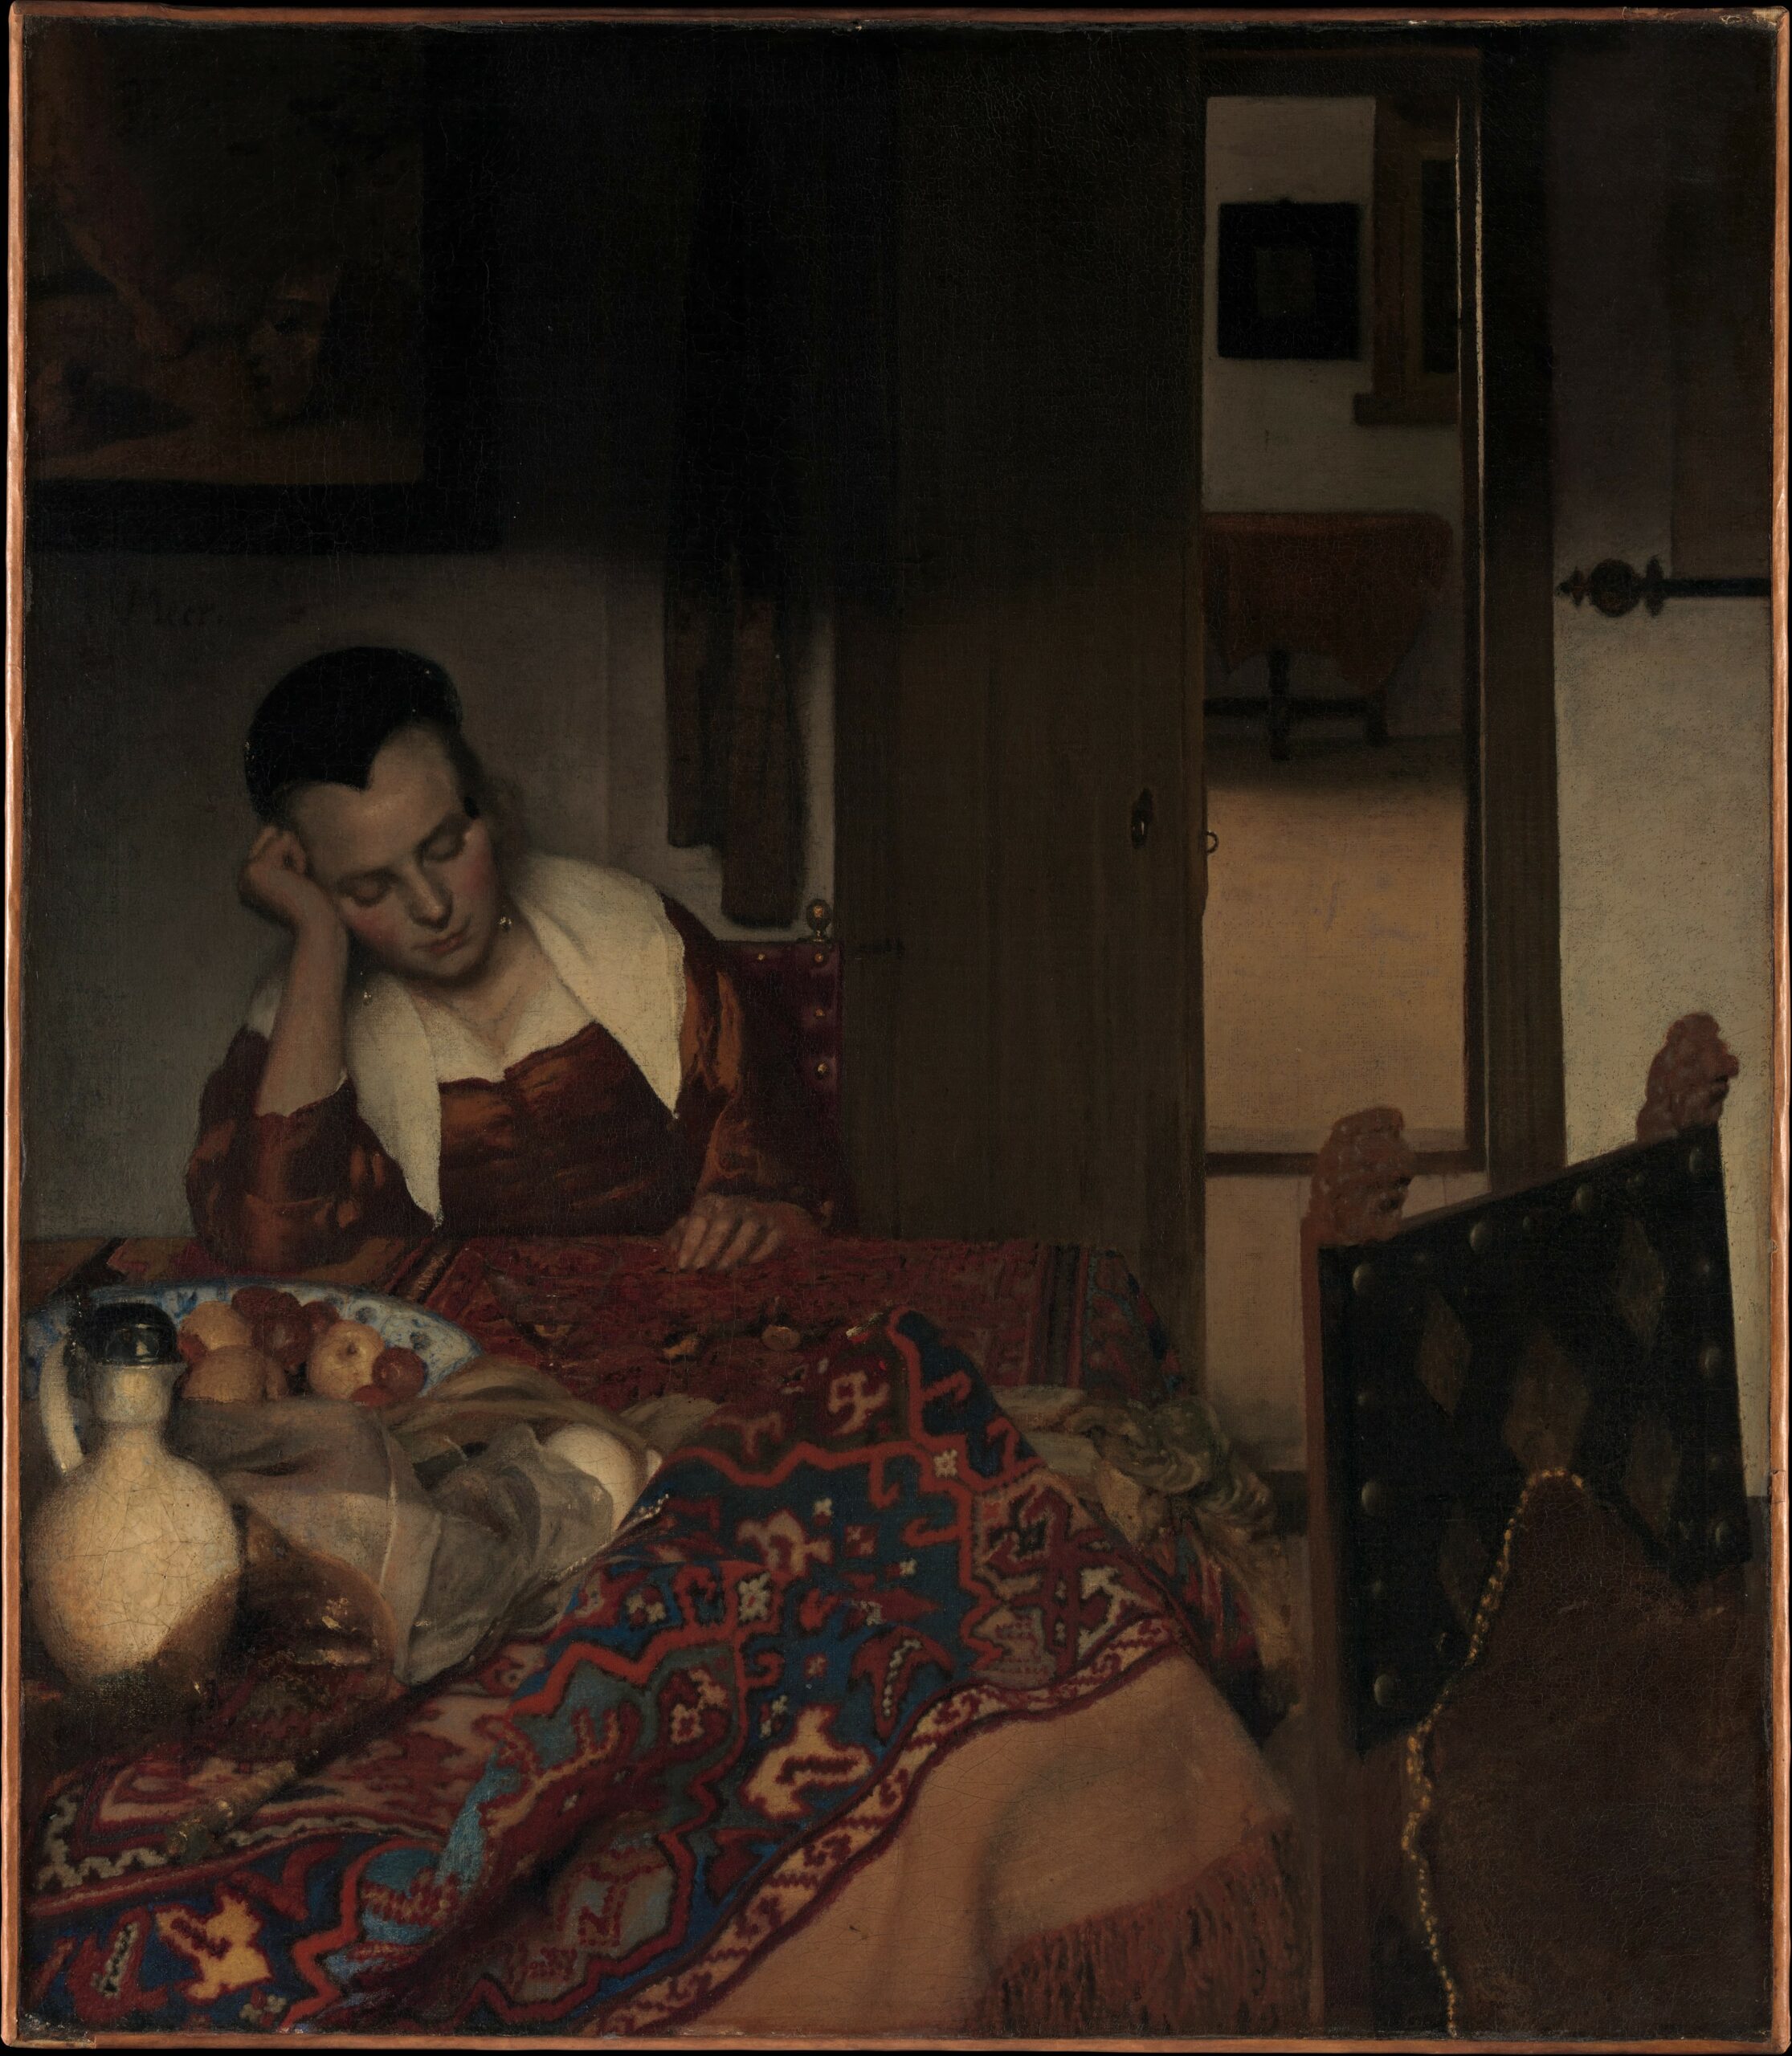 The misbehavior of unsupervised maidservants was a common subject for seventeenth-century Dutch painters. Yet in his depiction of a young maid dozing next to a glass of wine, Vermeer transfigured an ordinary scene into an investigation of light, color, and texture that supersedes any moralizing lesson. While the toppled glass at left (now abraded with time) and rumpled table carpet may indicate a recently departed visitor, X-radiographs indicate that Vermeer chose to remove a male figure he had originally included standing in the door­way, heightening the painting’s ambiguity.